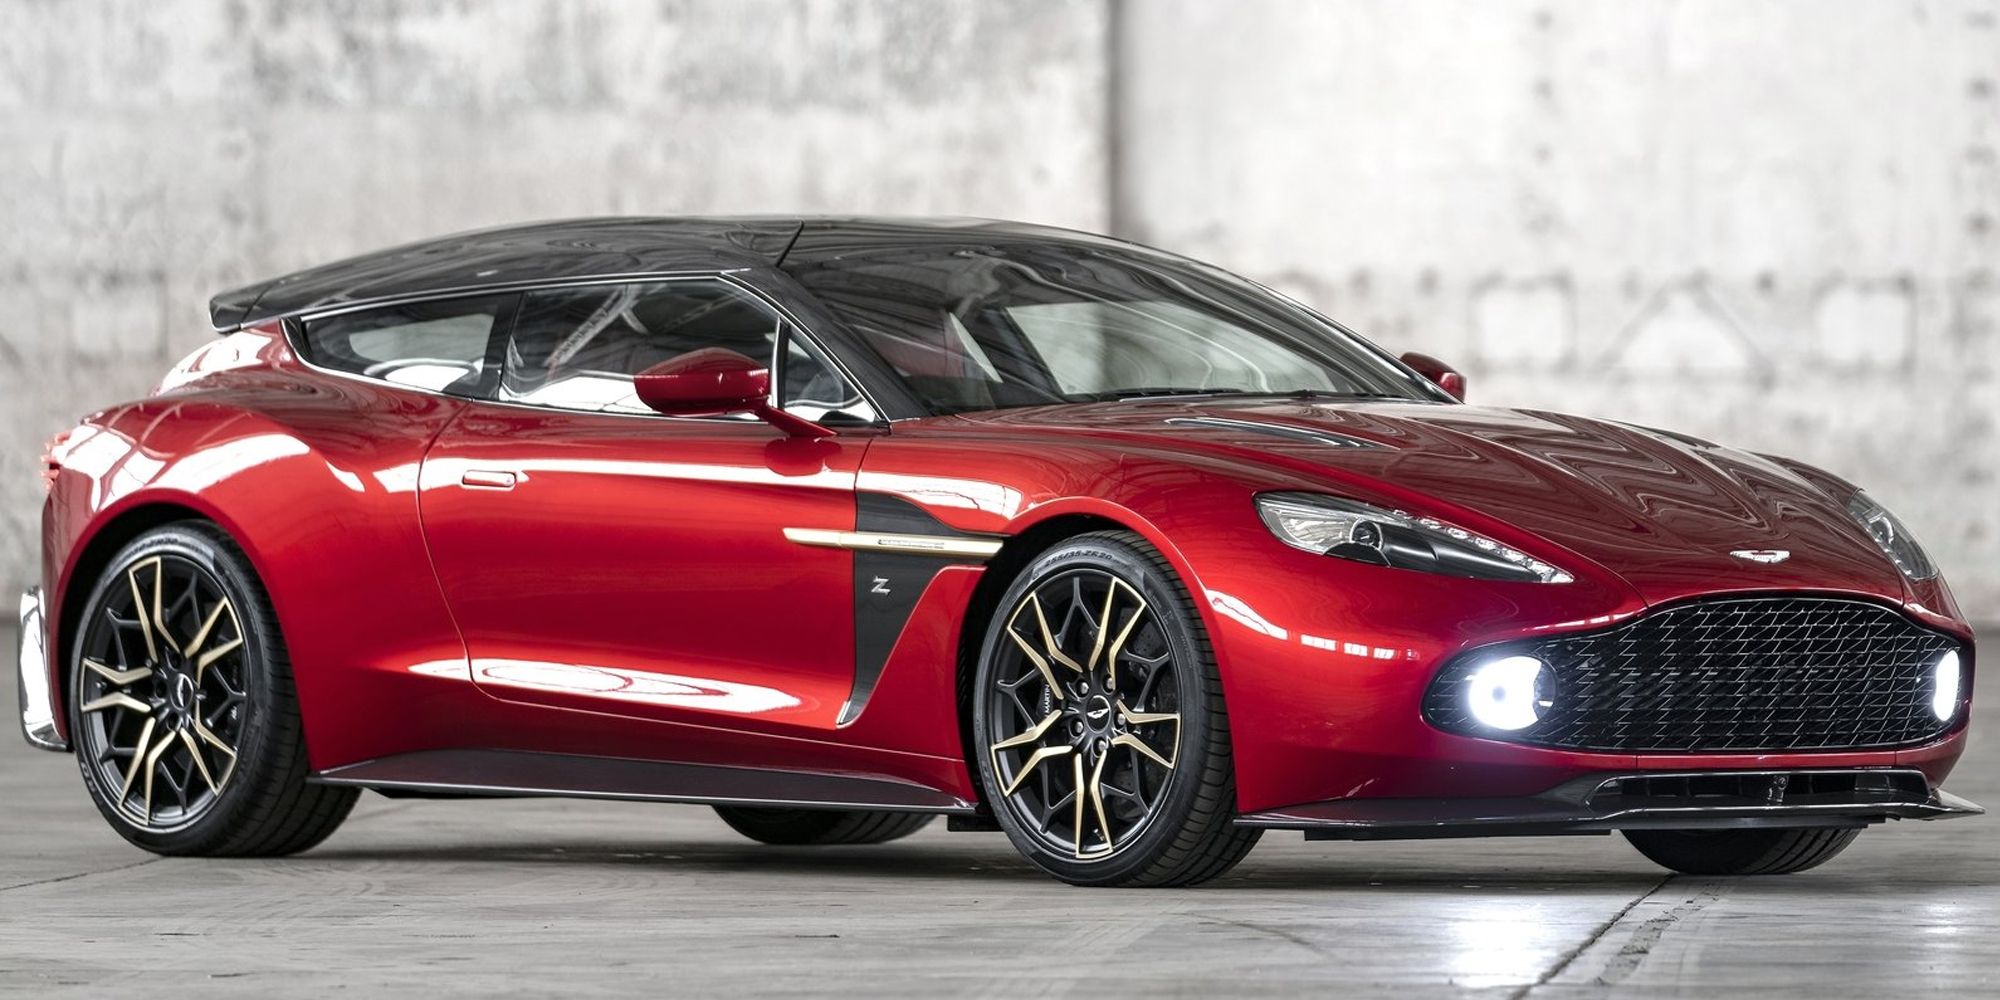 These Are The Coolest Shooting Brake Cars We've Ever Seen